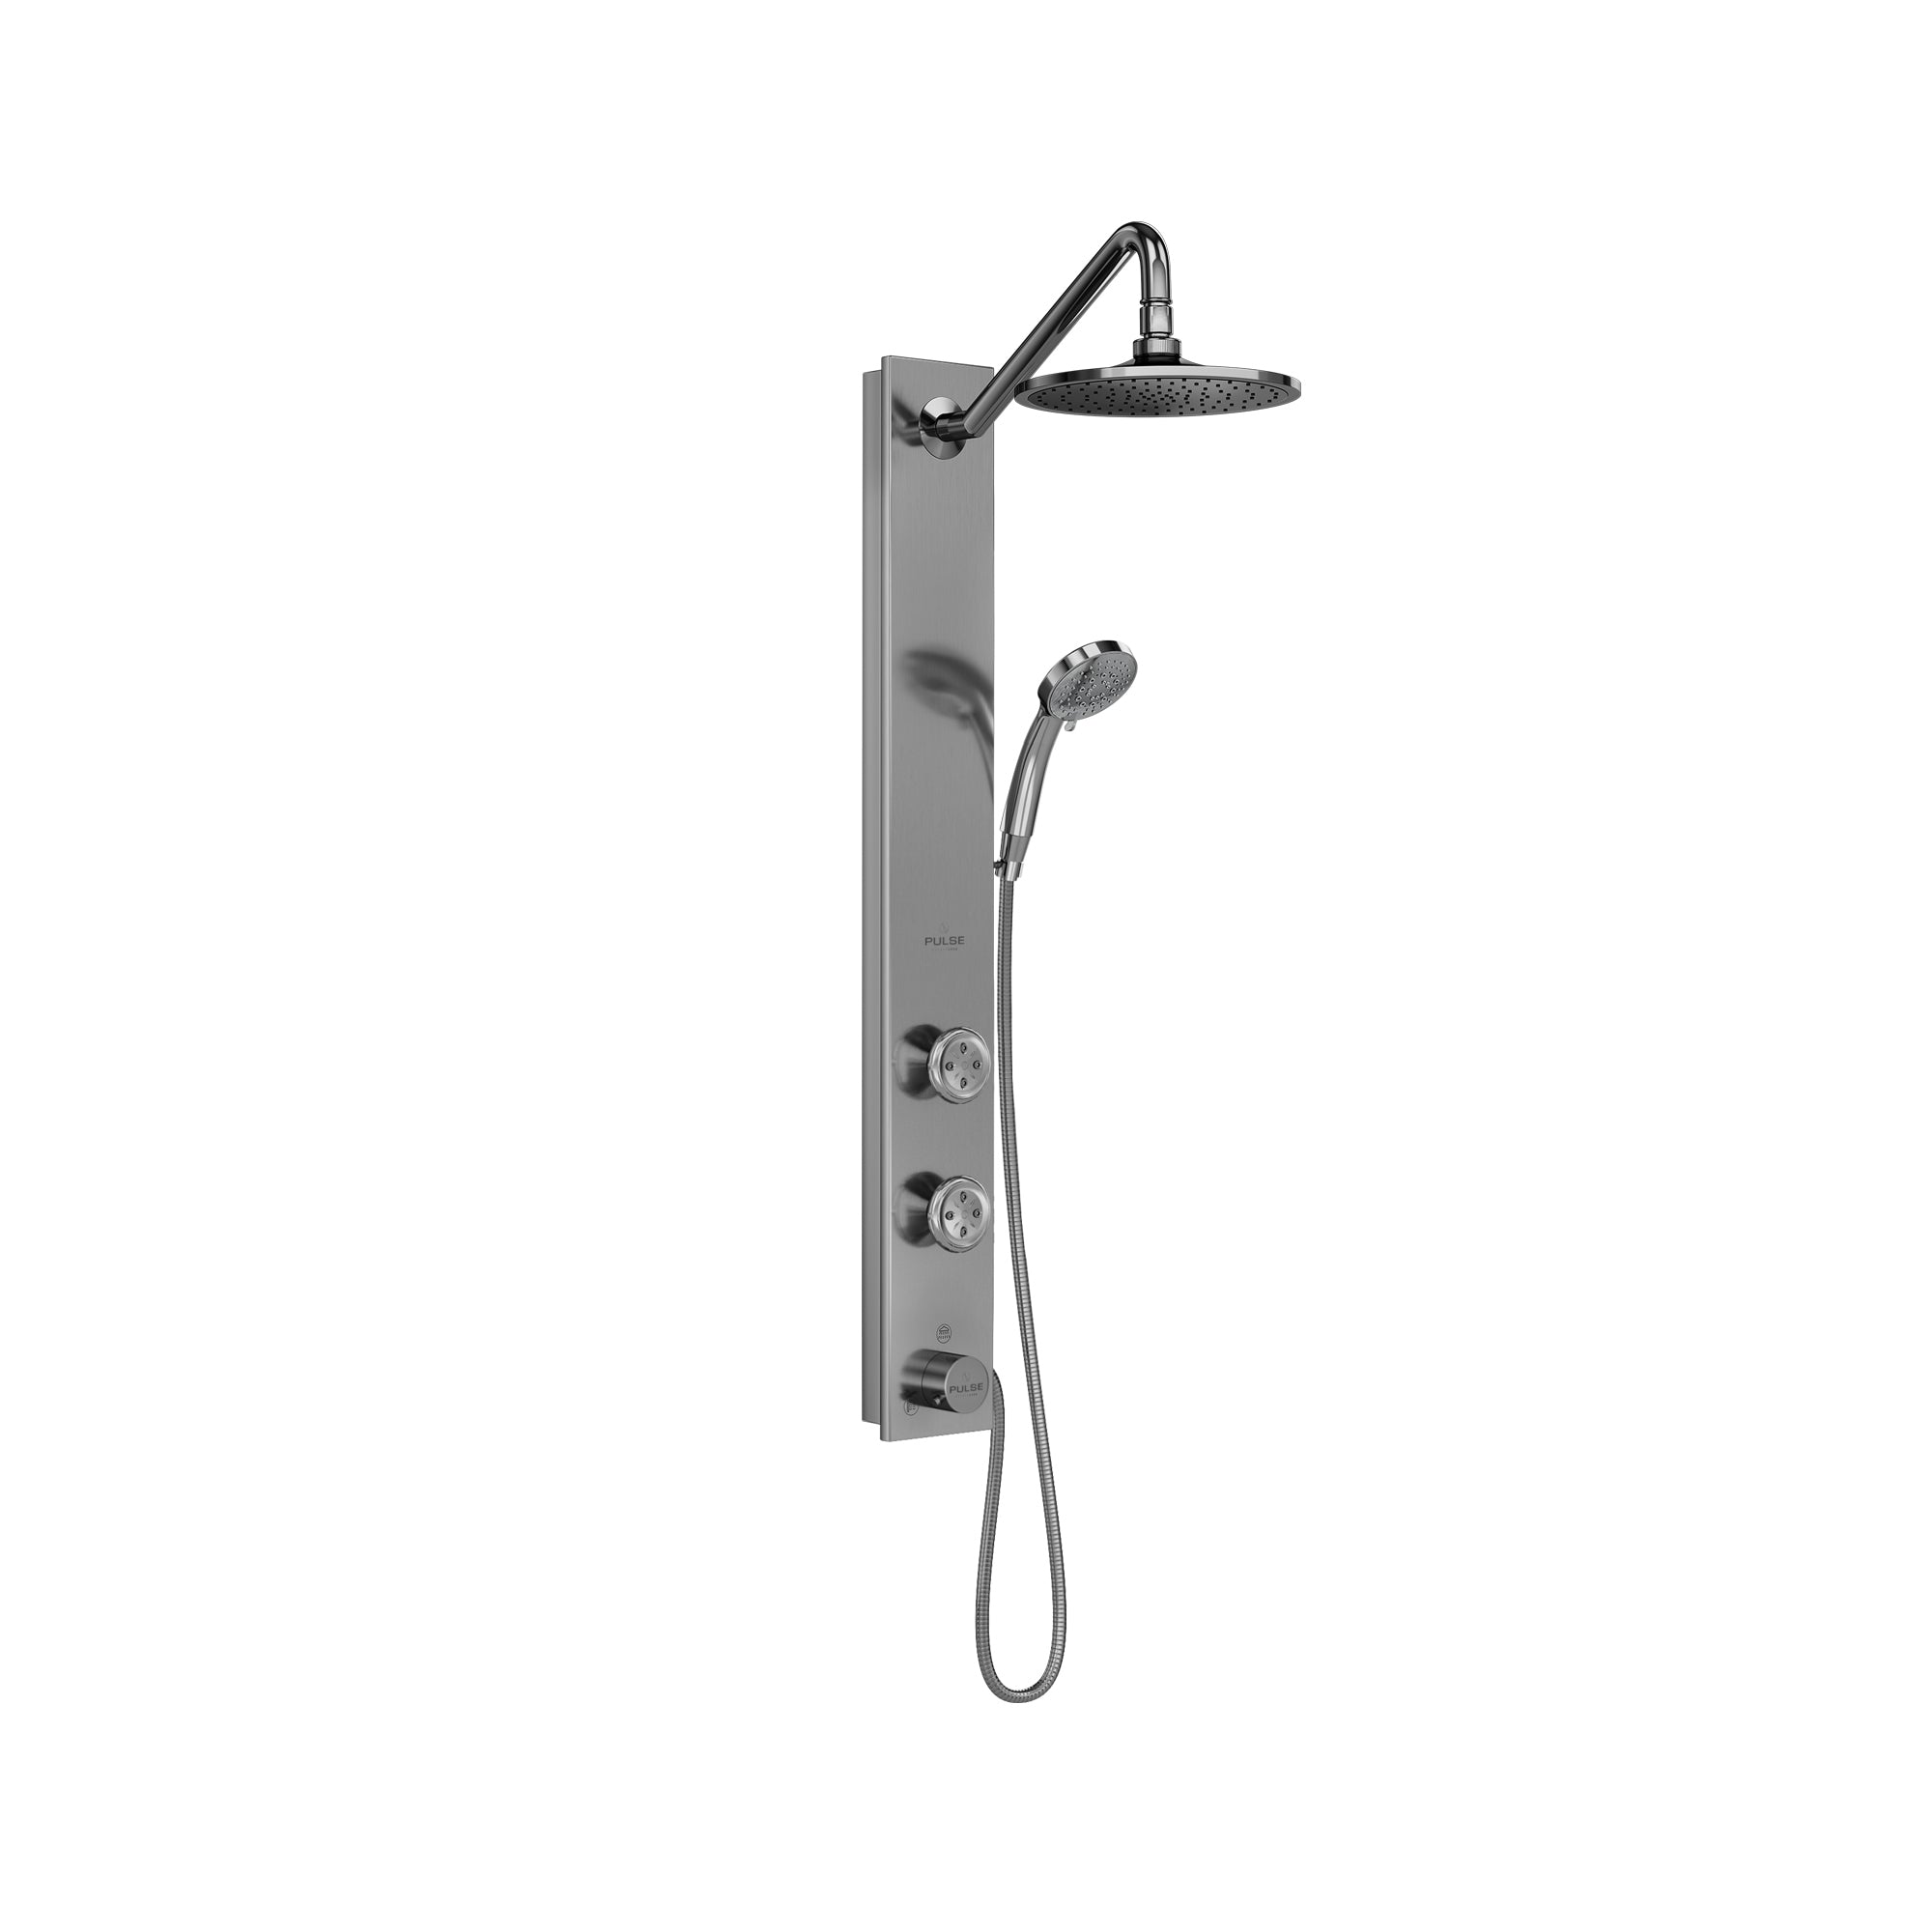 PULSE ShowerSpas Brushed Stainless Steel Shower System - Aloha Shower System - Chrome fixtures - with 8" Rain showerhead with soft tips, 5-Function hand shower with 59" double-interlocking stainless steel hose, 2 body jets and Brass diverter - 1021-SSB - Vital Hydrotherapy